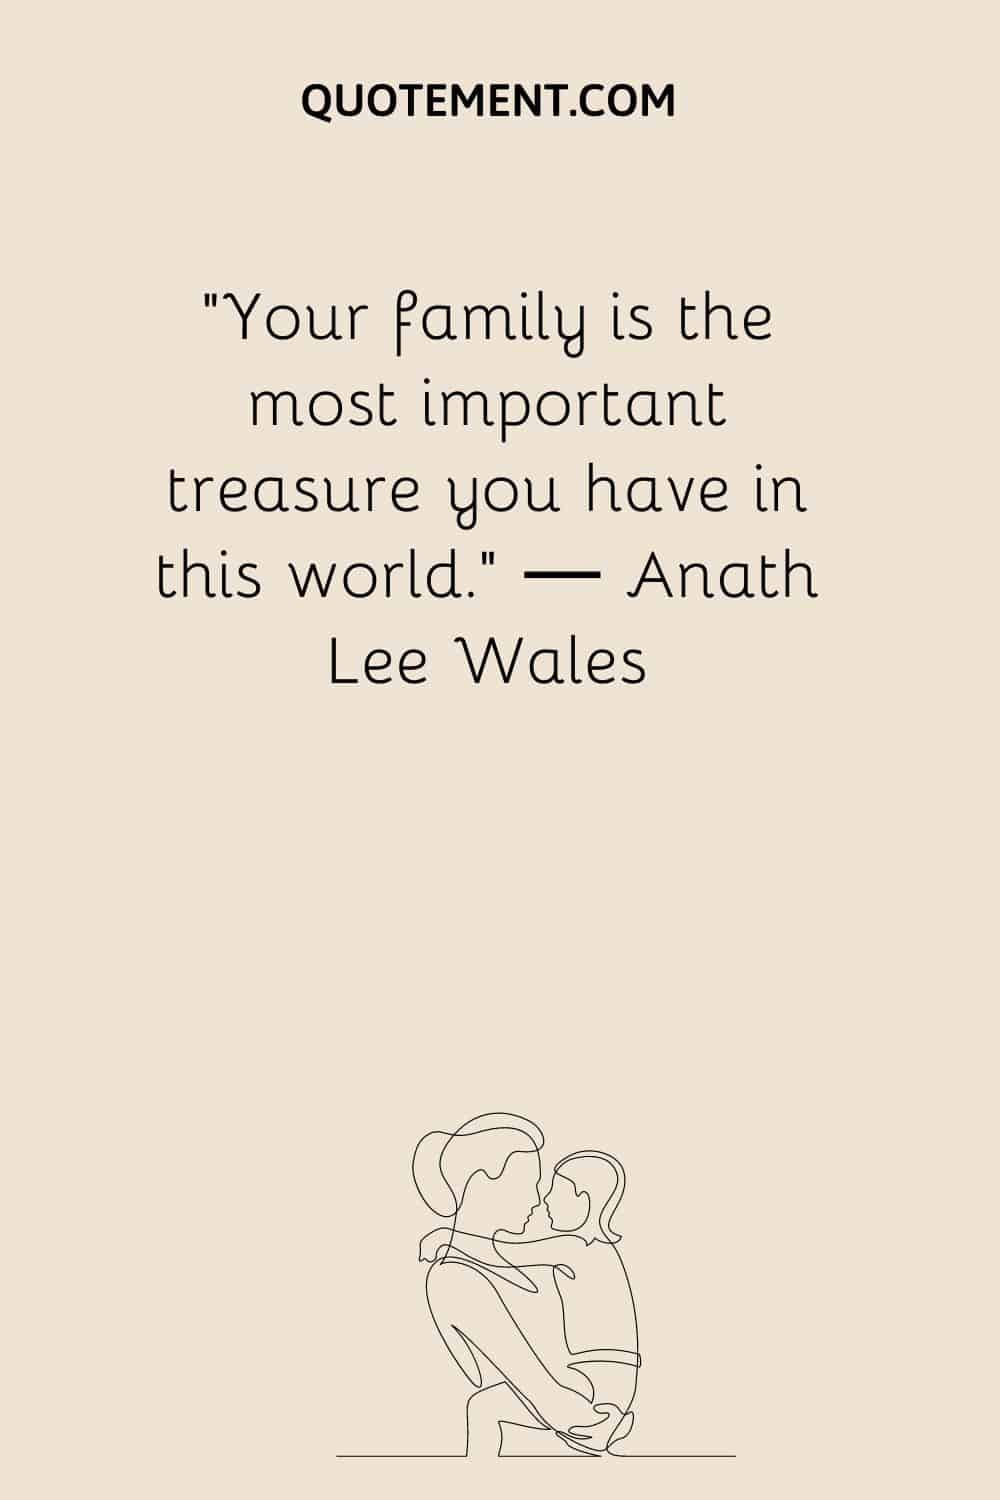 Your family is the most important treasure you have in this world